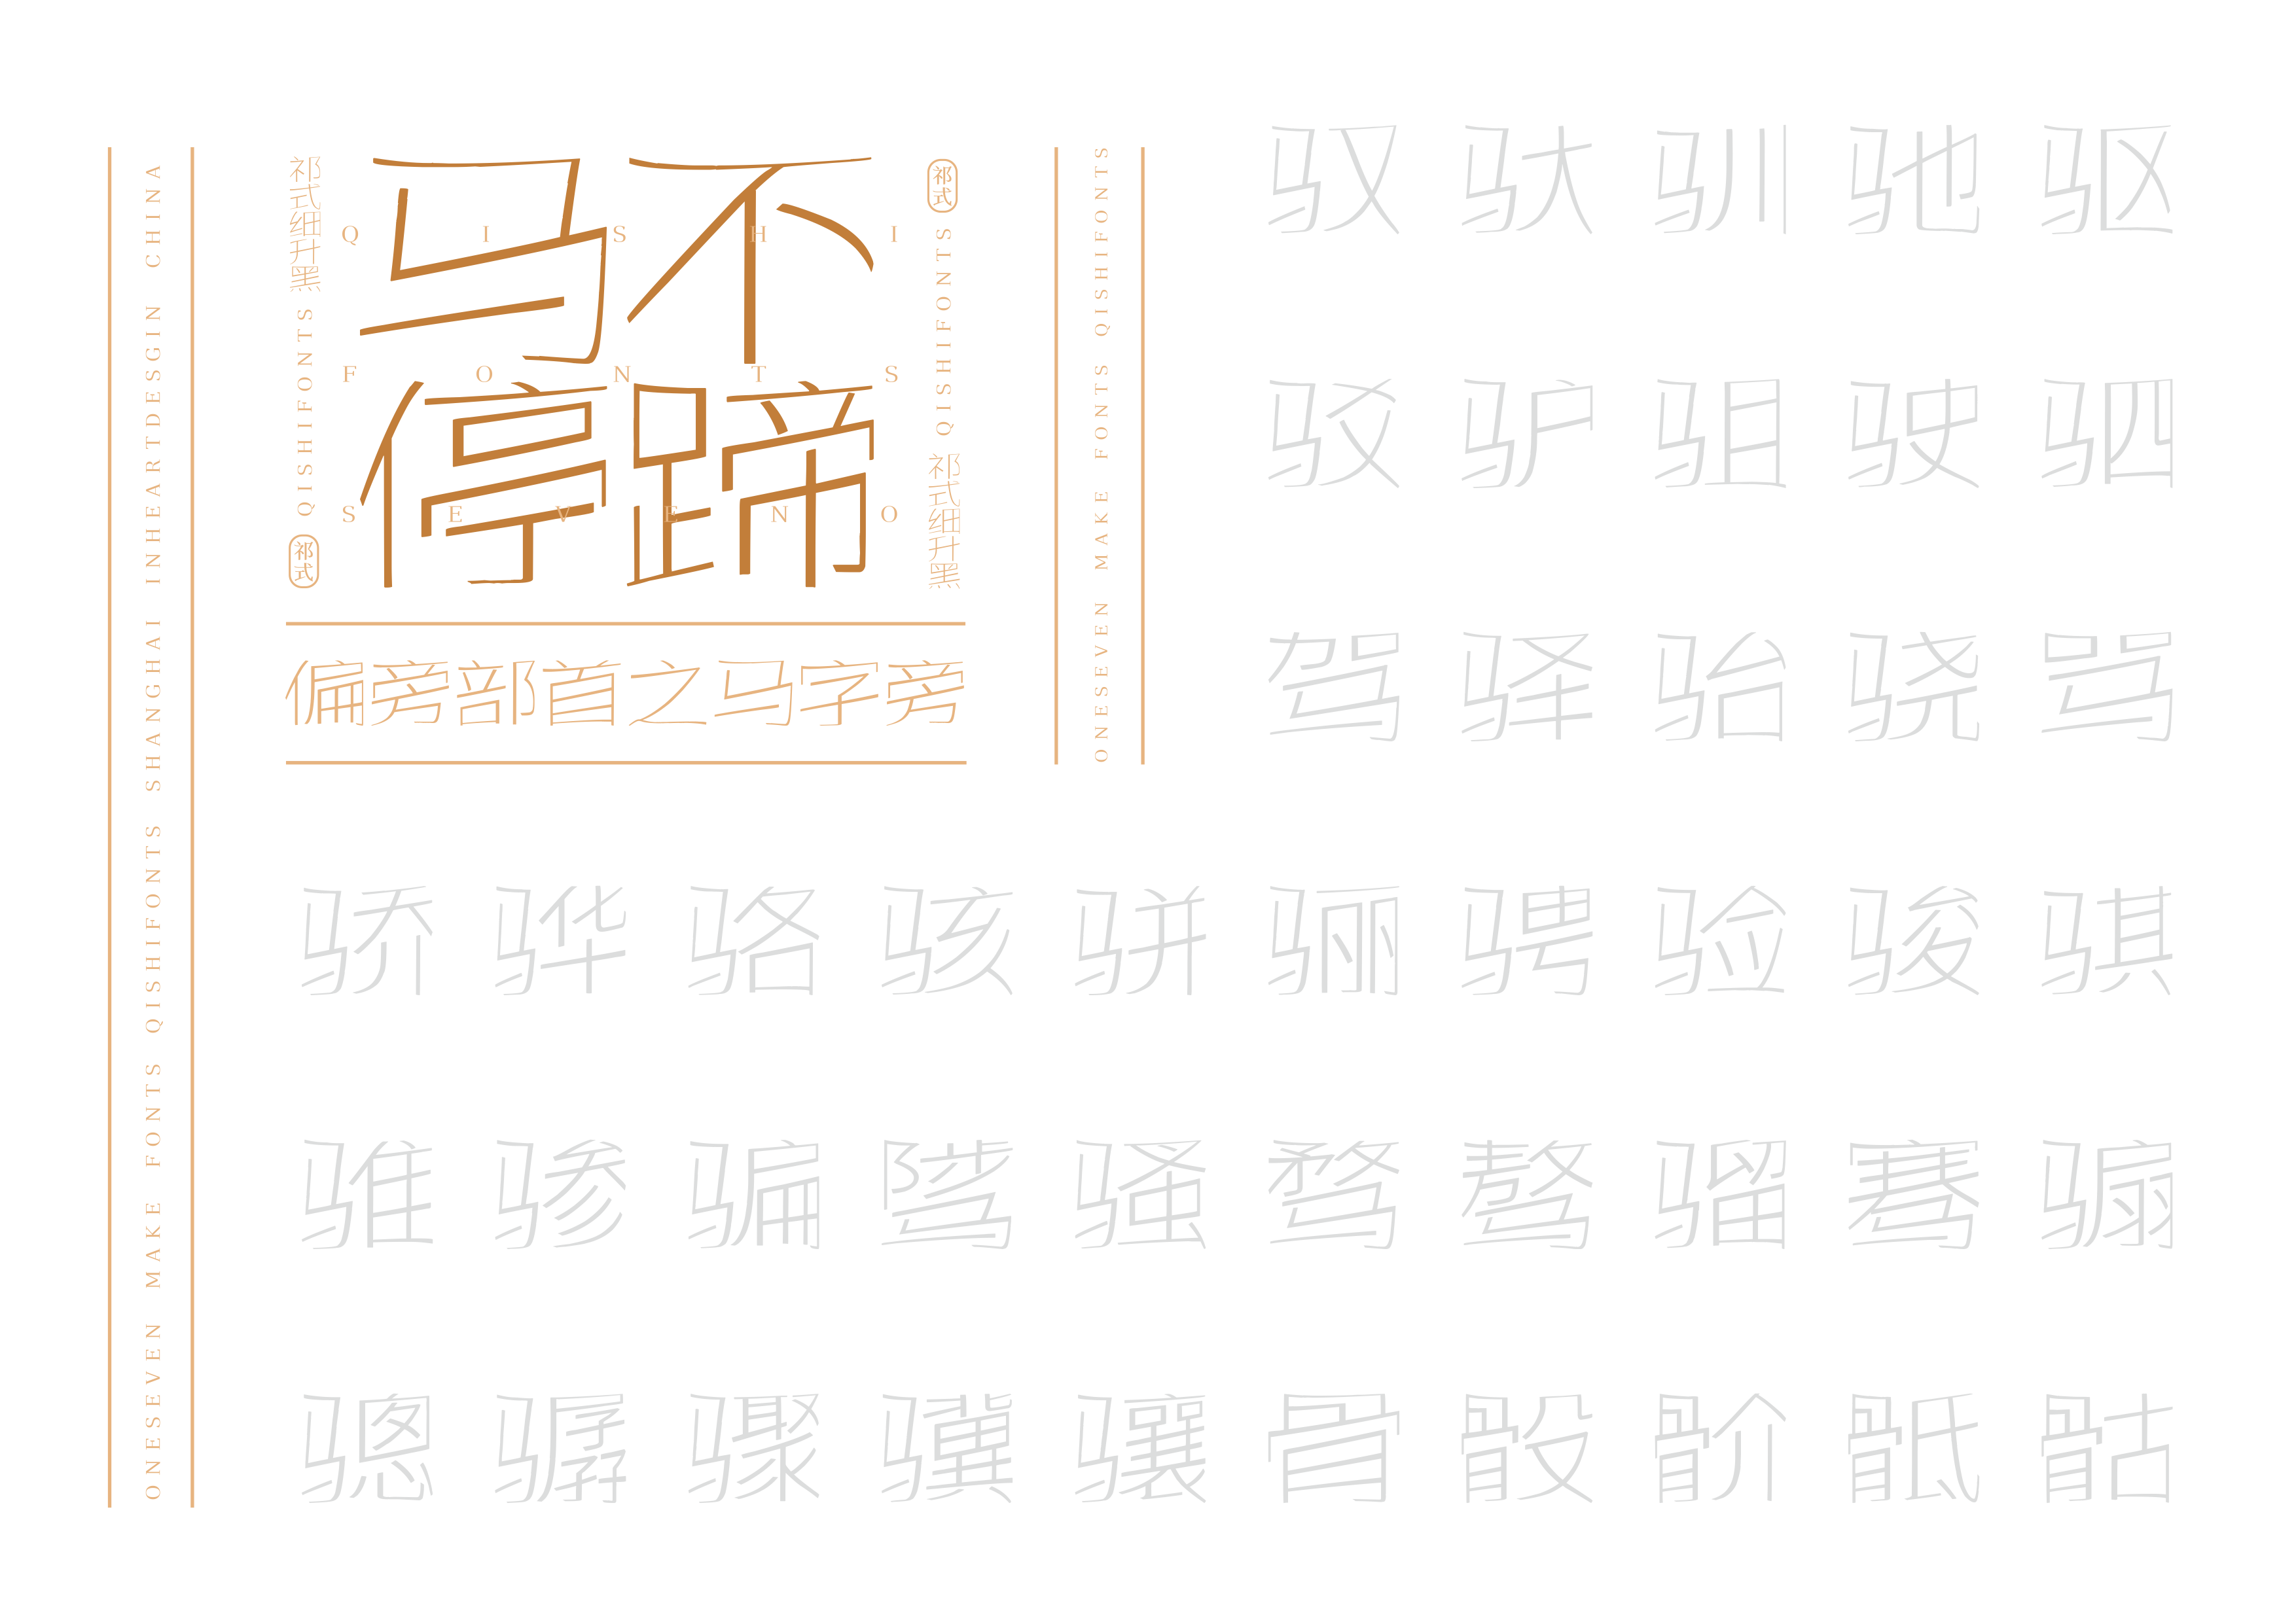 49P Collection of the latest Chinese font design schemes in 2021 #.119